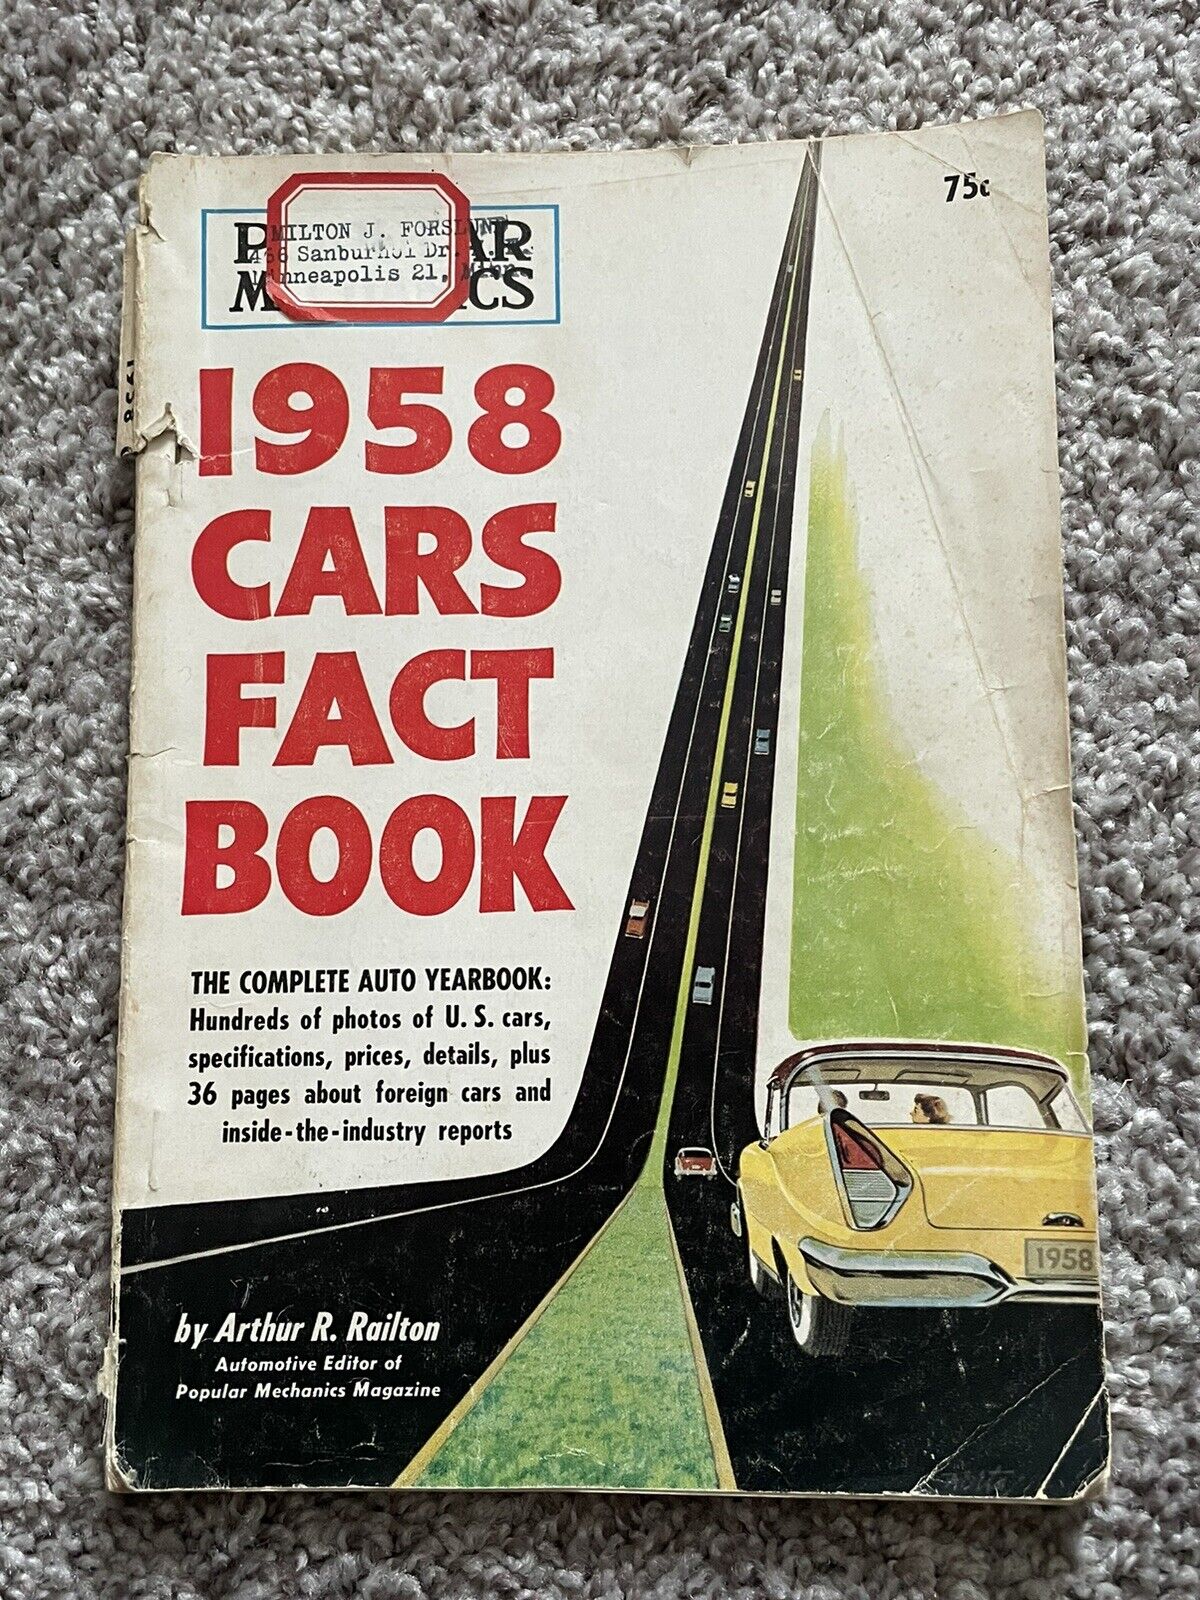 Vintage Popular Mechanics Mag 1958 Cars Fact Book Complete Yearbook